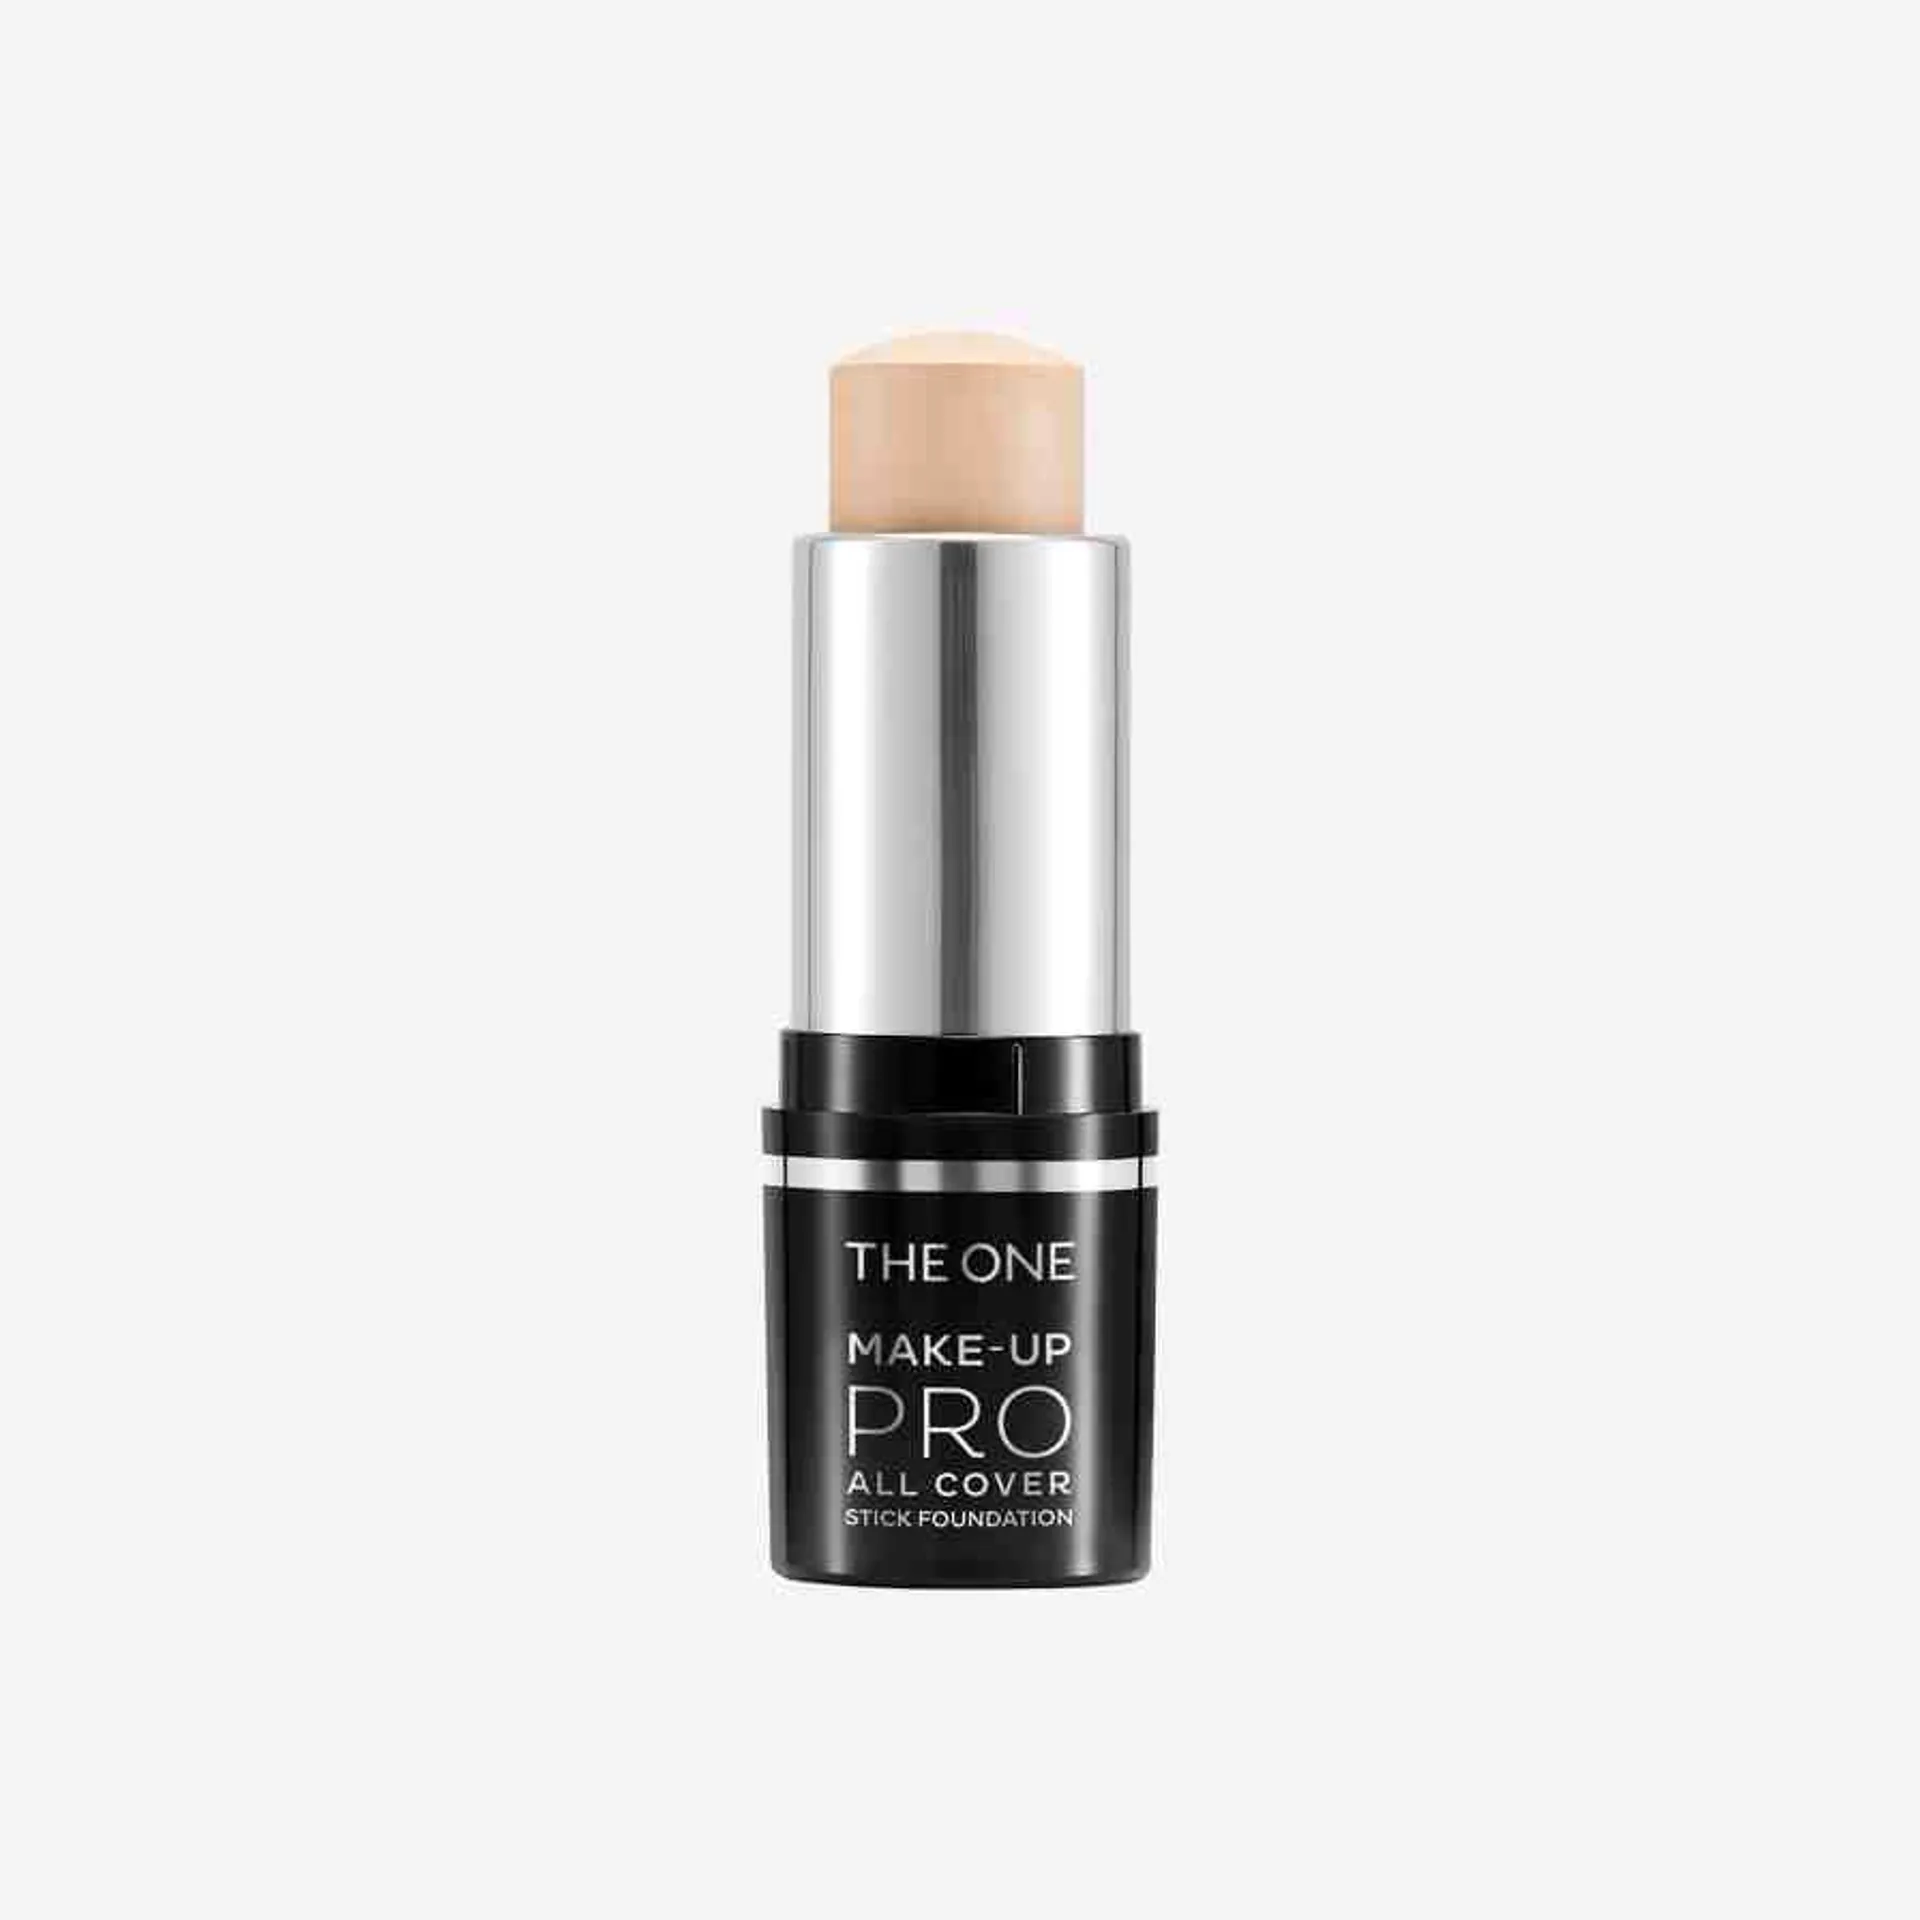 Make-up Pro All Cover Stick Foundation